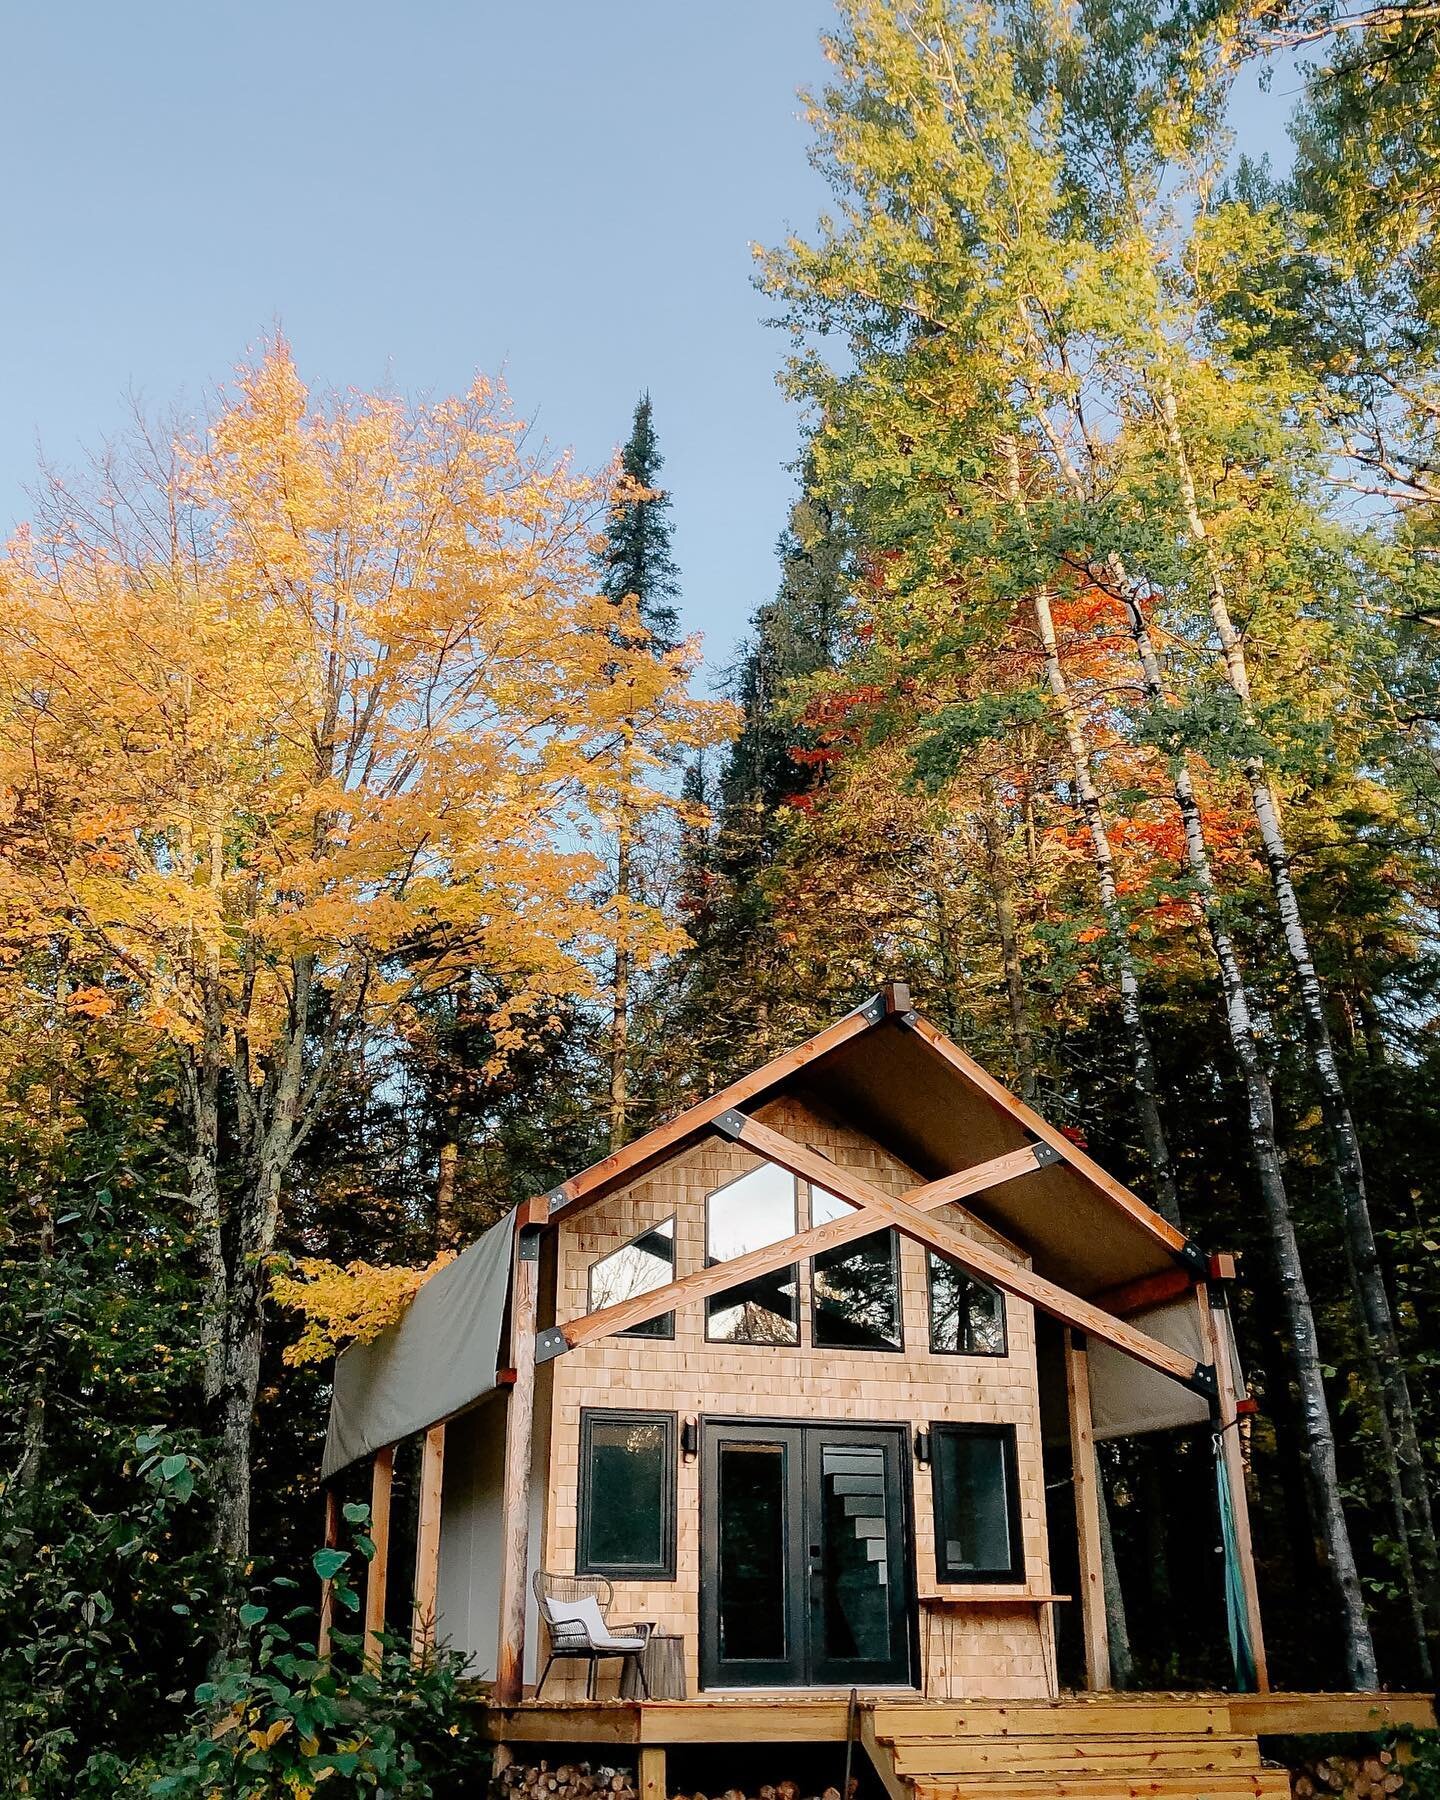 Our fall colors are a little late to the party this year&hellip;but we&rsquo;re not mad about it 😍🍁
⠀⠀⠀⠀⠀⠀⠀⠀⠀
Did you know that we offer tours of our model cabin, Cedar One, located in Duluth MN? If you&rsquo;re planning a glampsite or outdoor retr